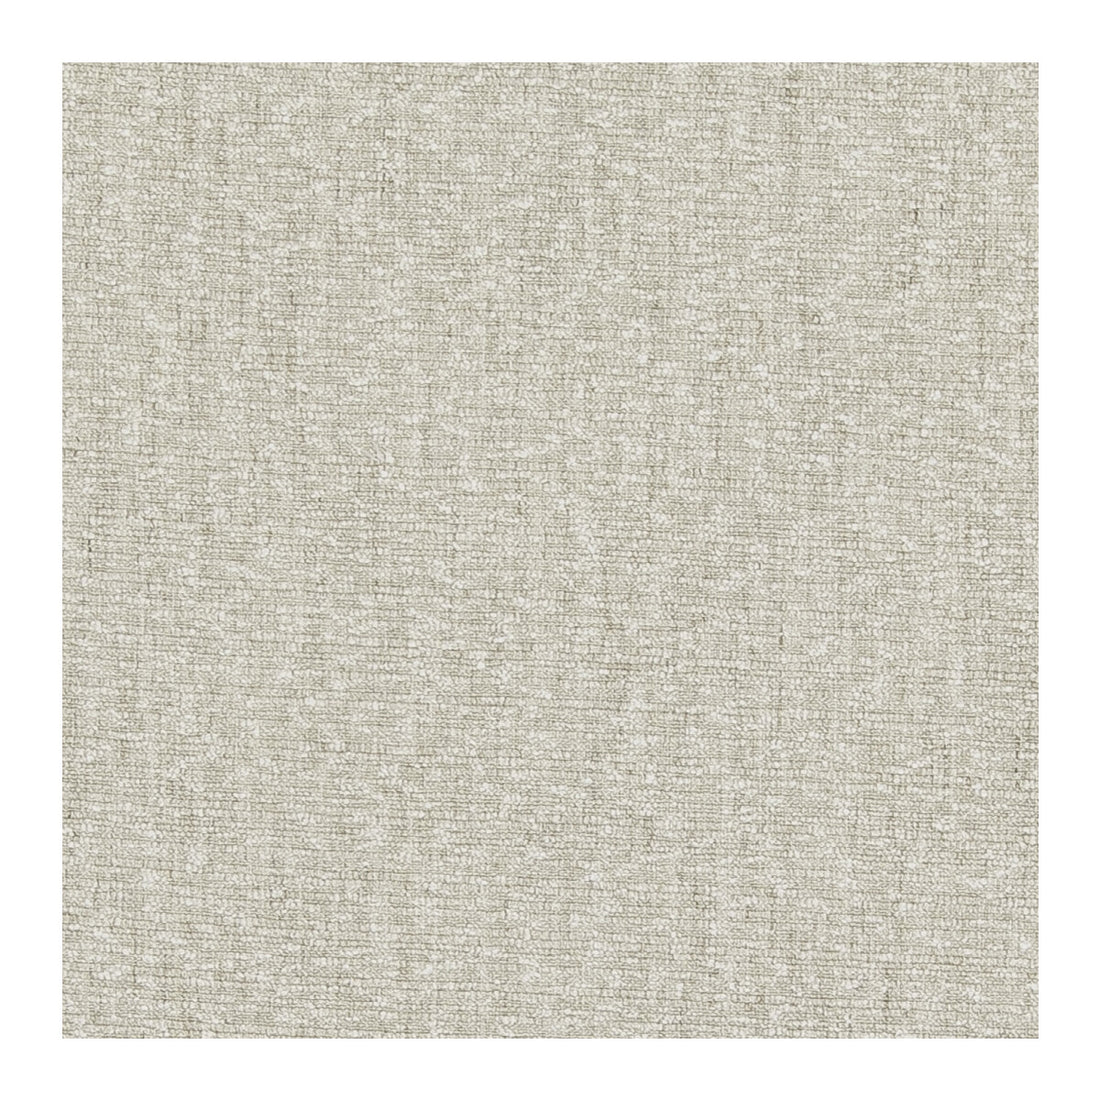 Fes fabric in parchment color - pattern ED85366.225.0 - by Threads in the Quintessential Textures collection